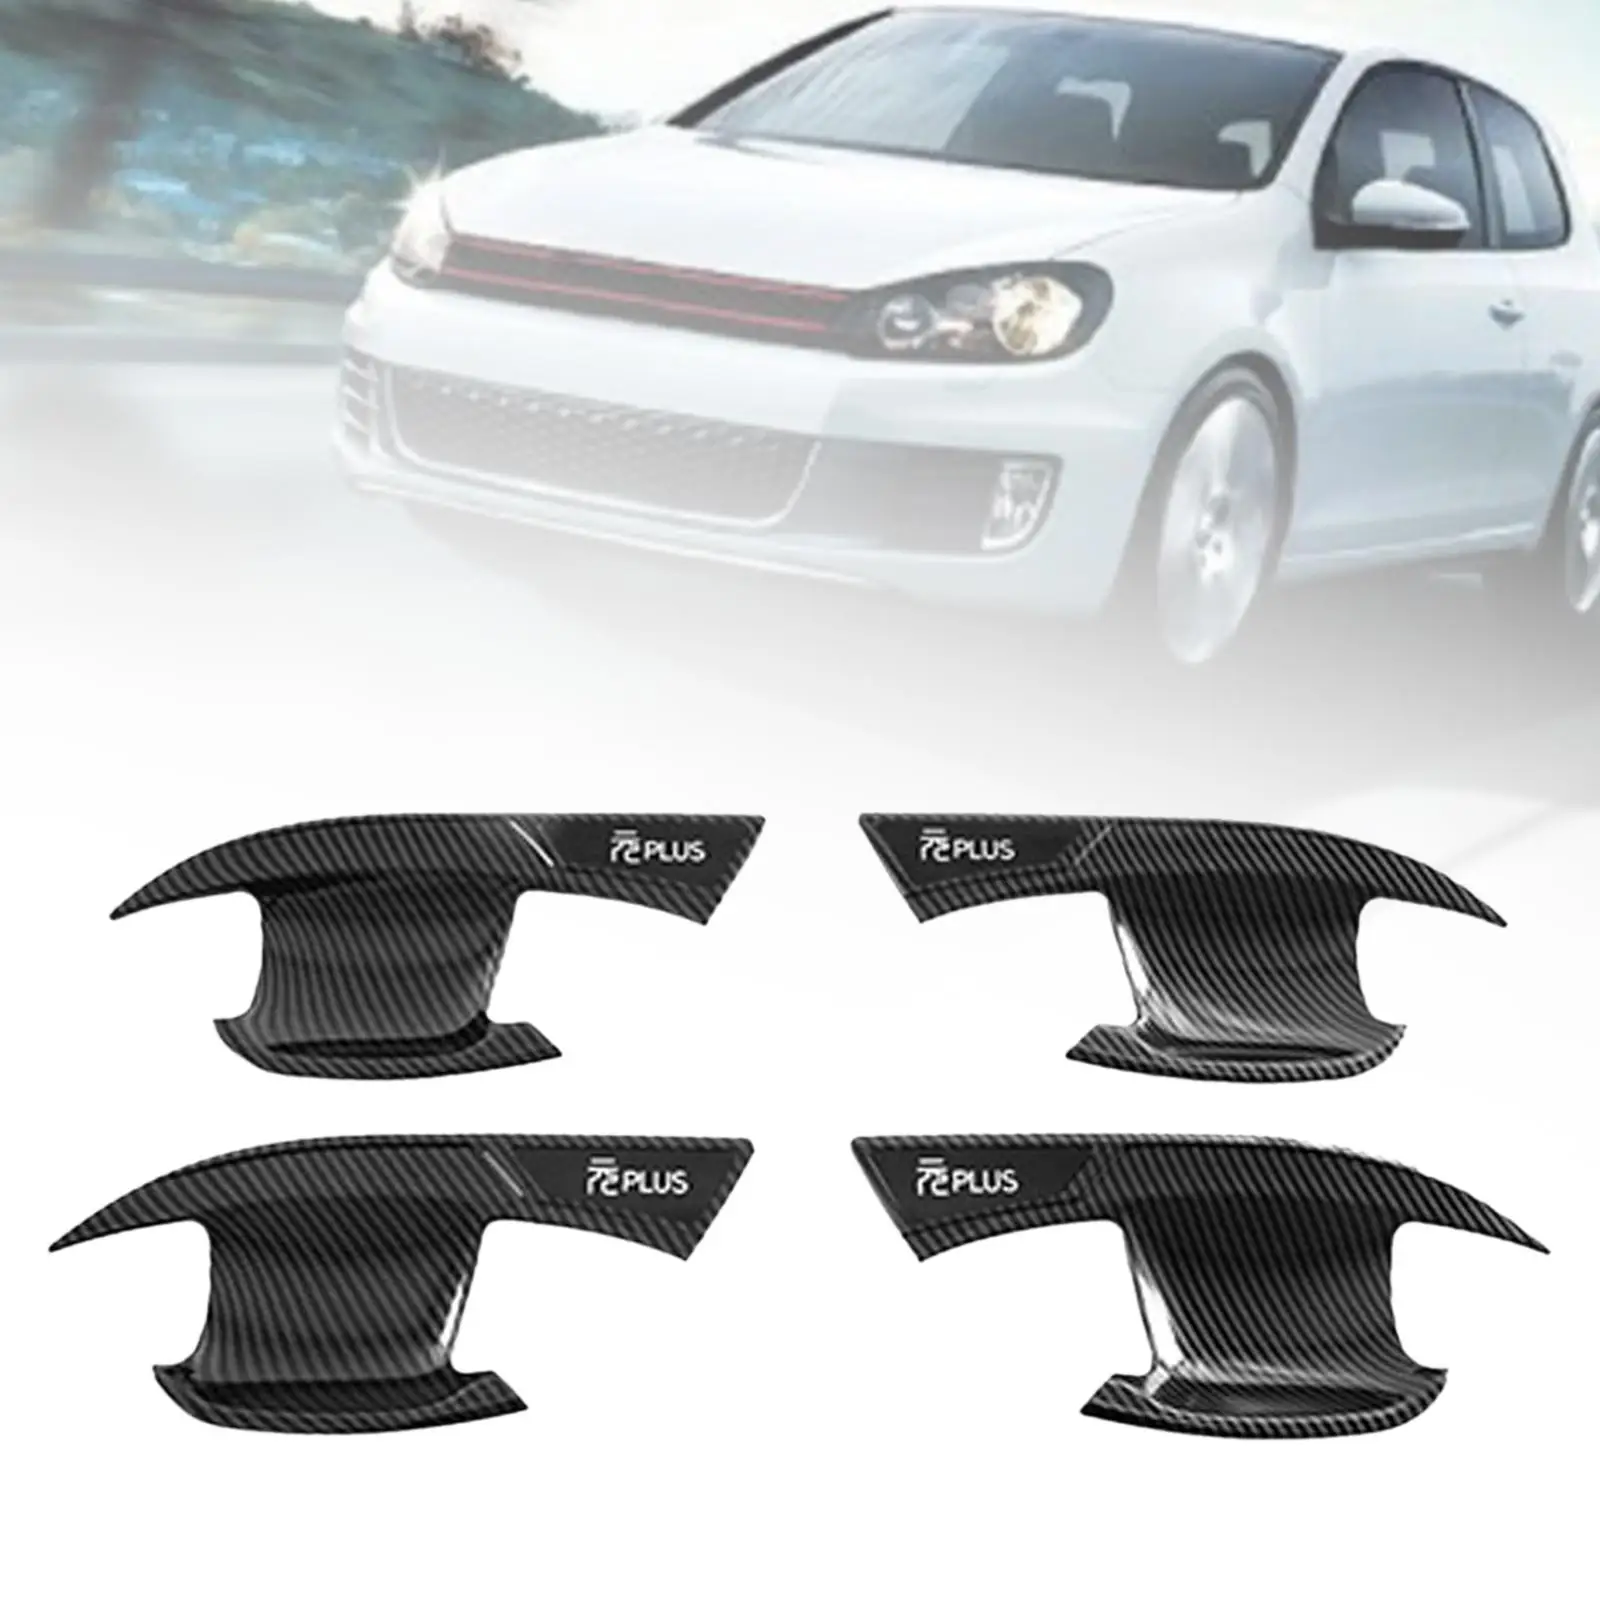 4x Car Door Handle Cup Scratch Protector Replacement Car Accessories for Byd Atto 3 22